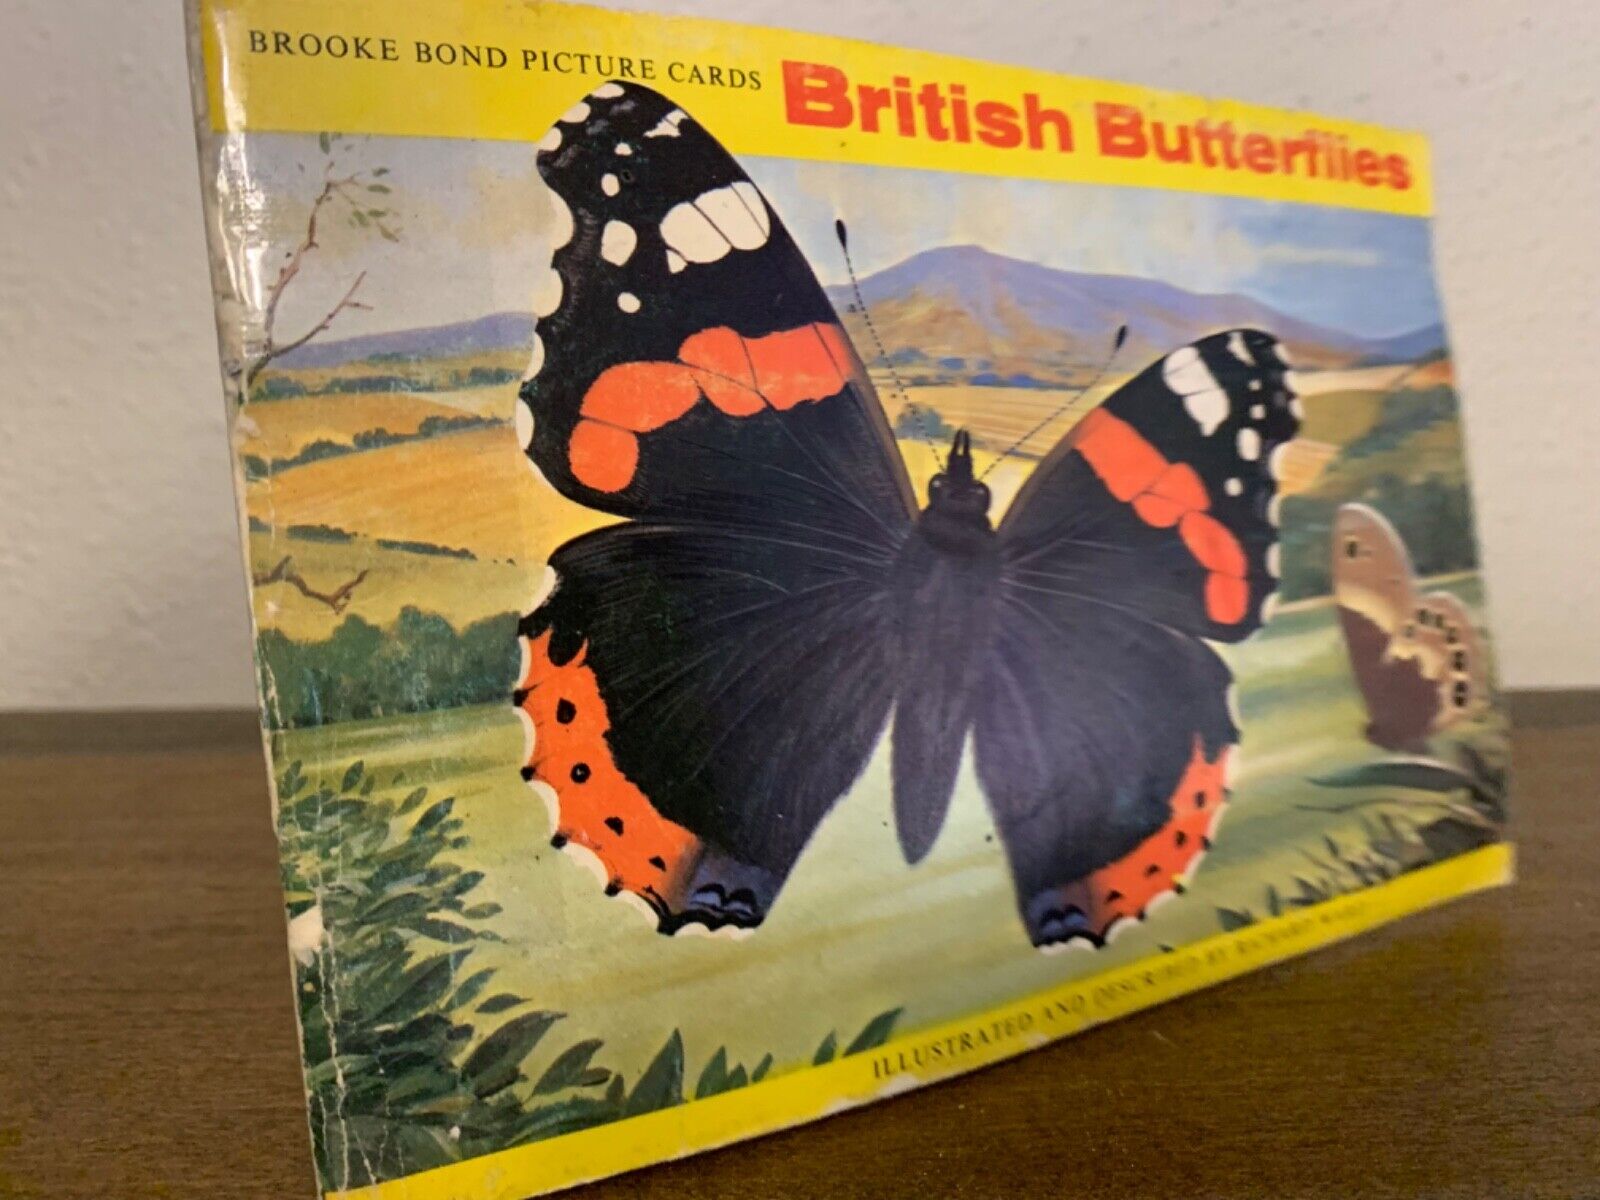 Brooke Bond Picture Cards - British Butterflies - Complete set of cards